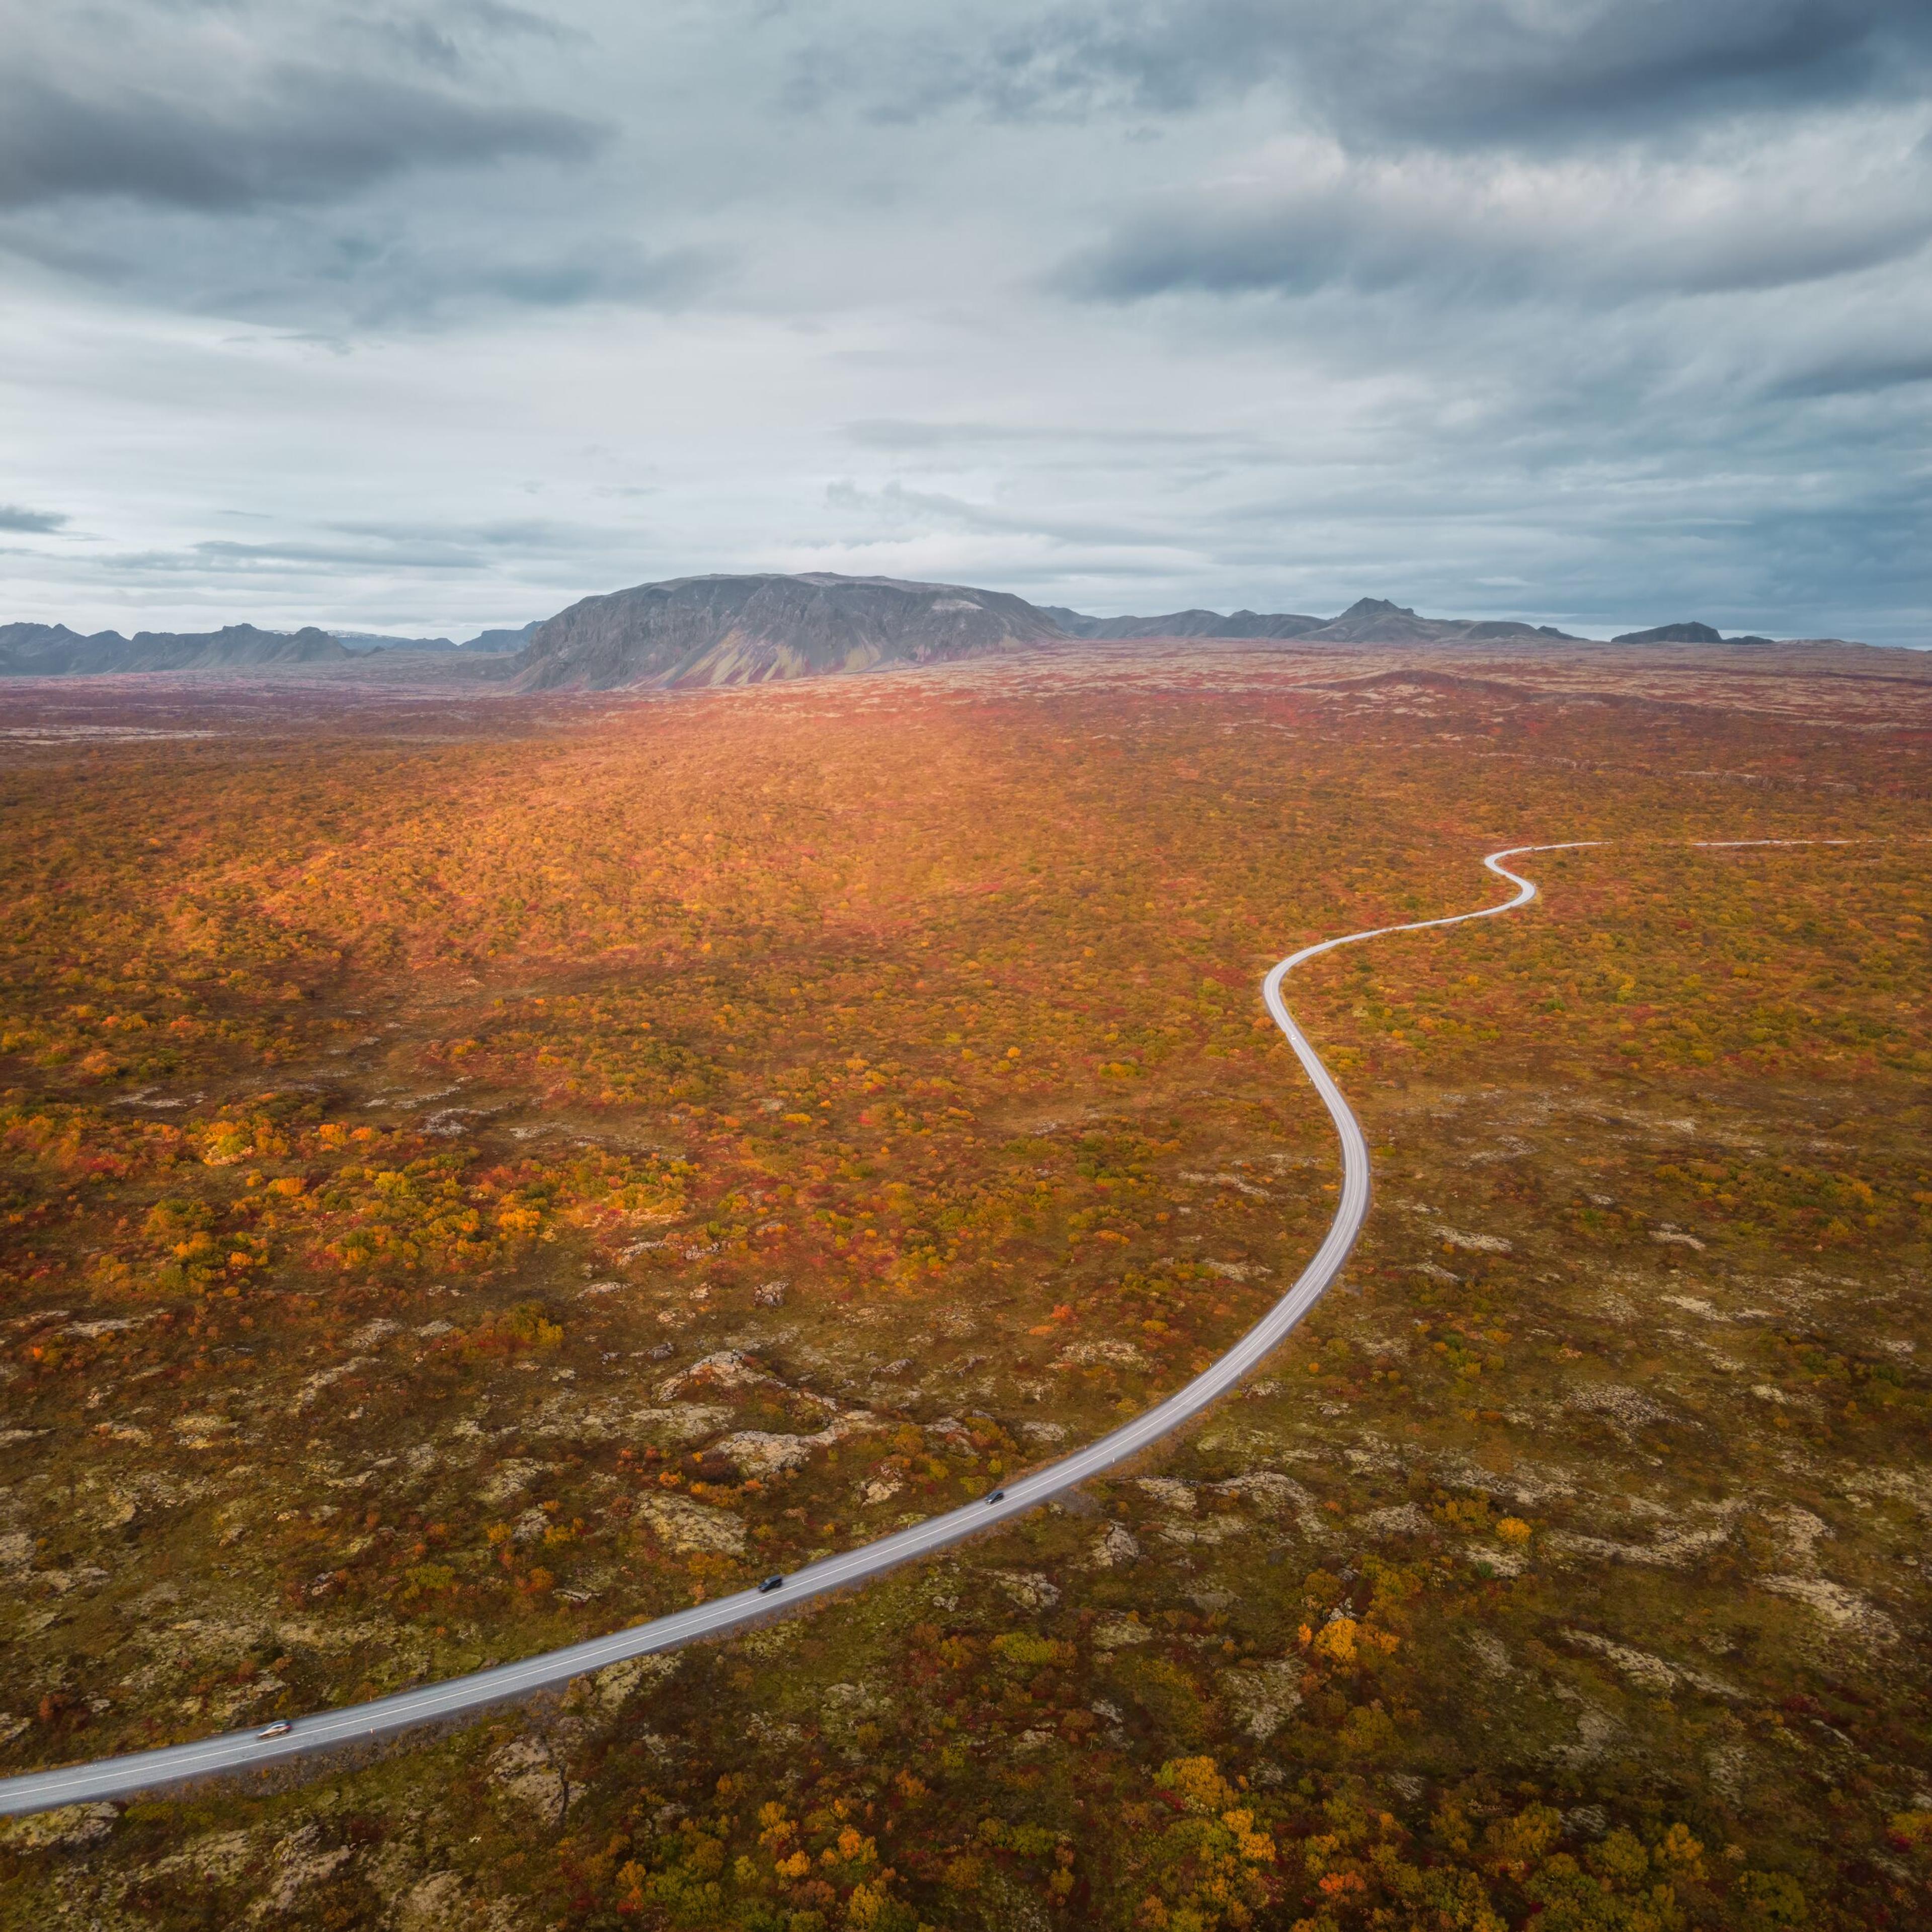 A winding road cuts through a vast expanse of autumn-colored tundra, stretching towards the horizon under a cloudy sky, showcasing the stark and beautiful wilderness.